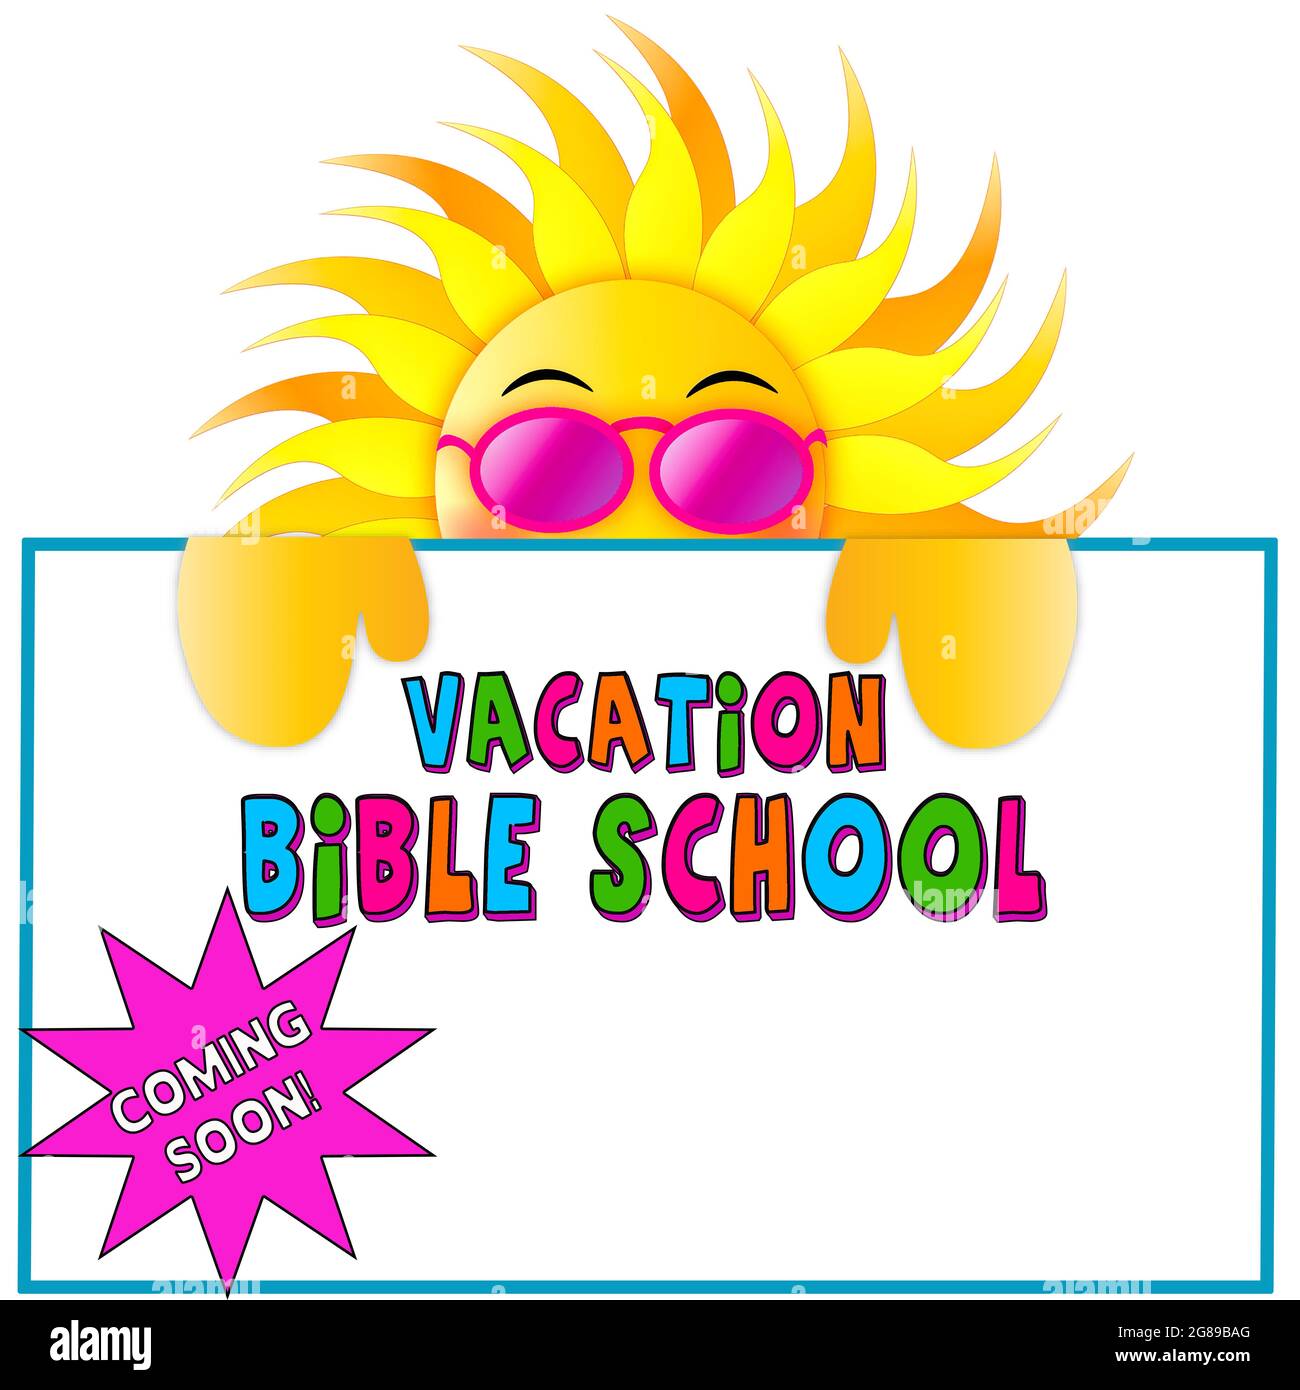 Vacation Bible School Graphic with Sun wearing sunglasses hold advertisement sign Stock Photo